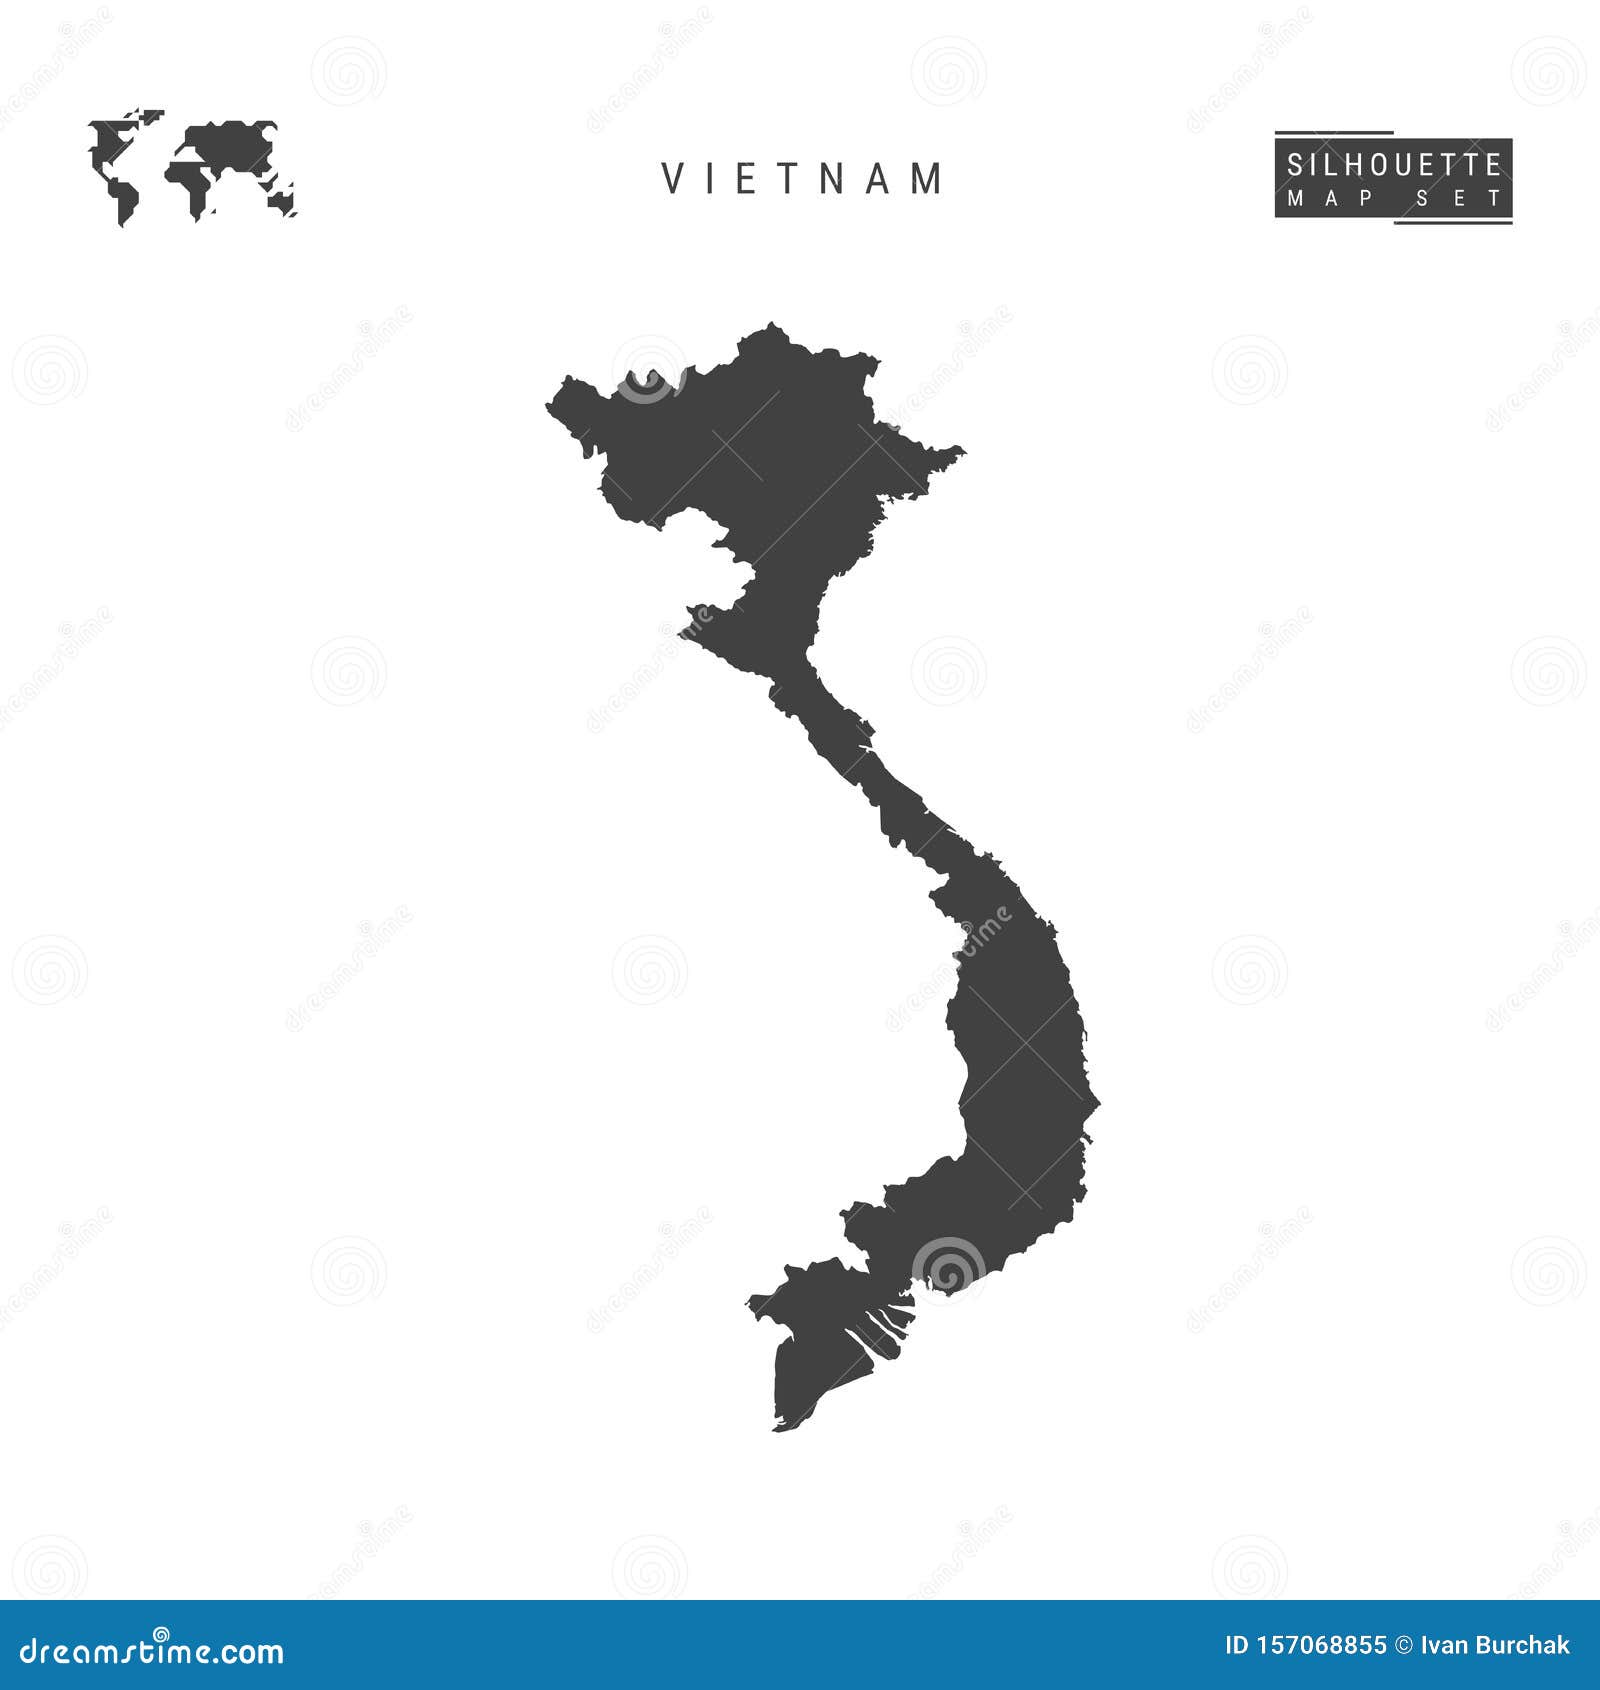 Vietnam Vector Map Isolated On White Background High Detailed Black